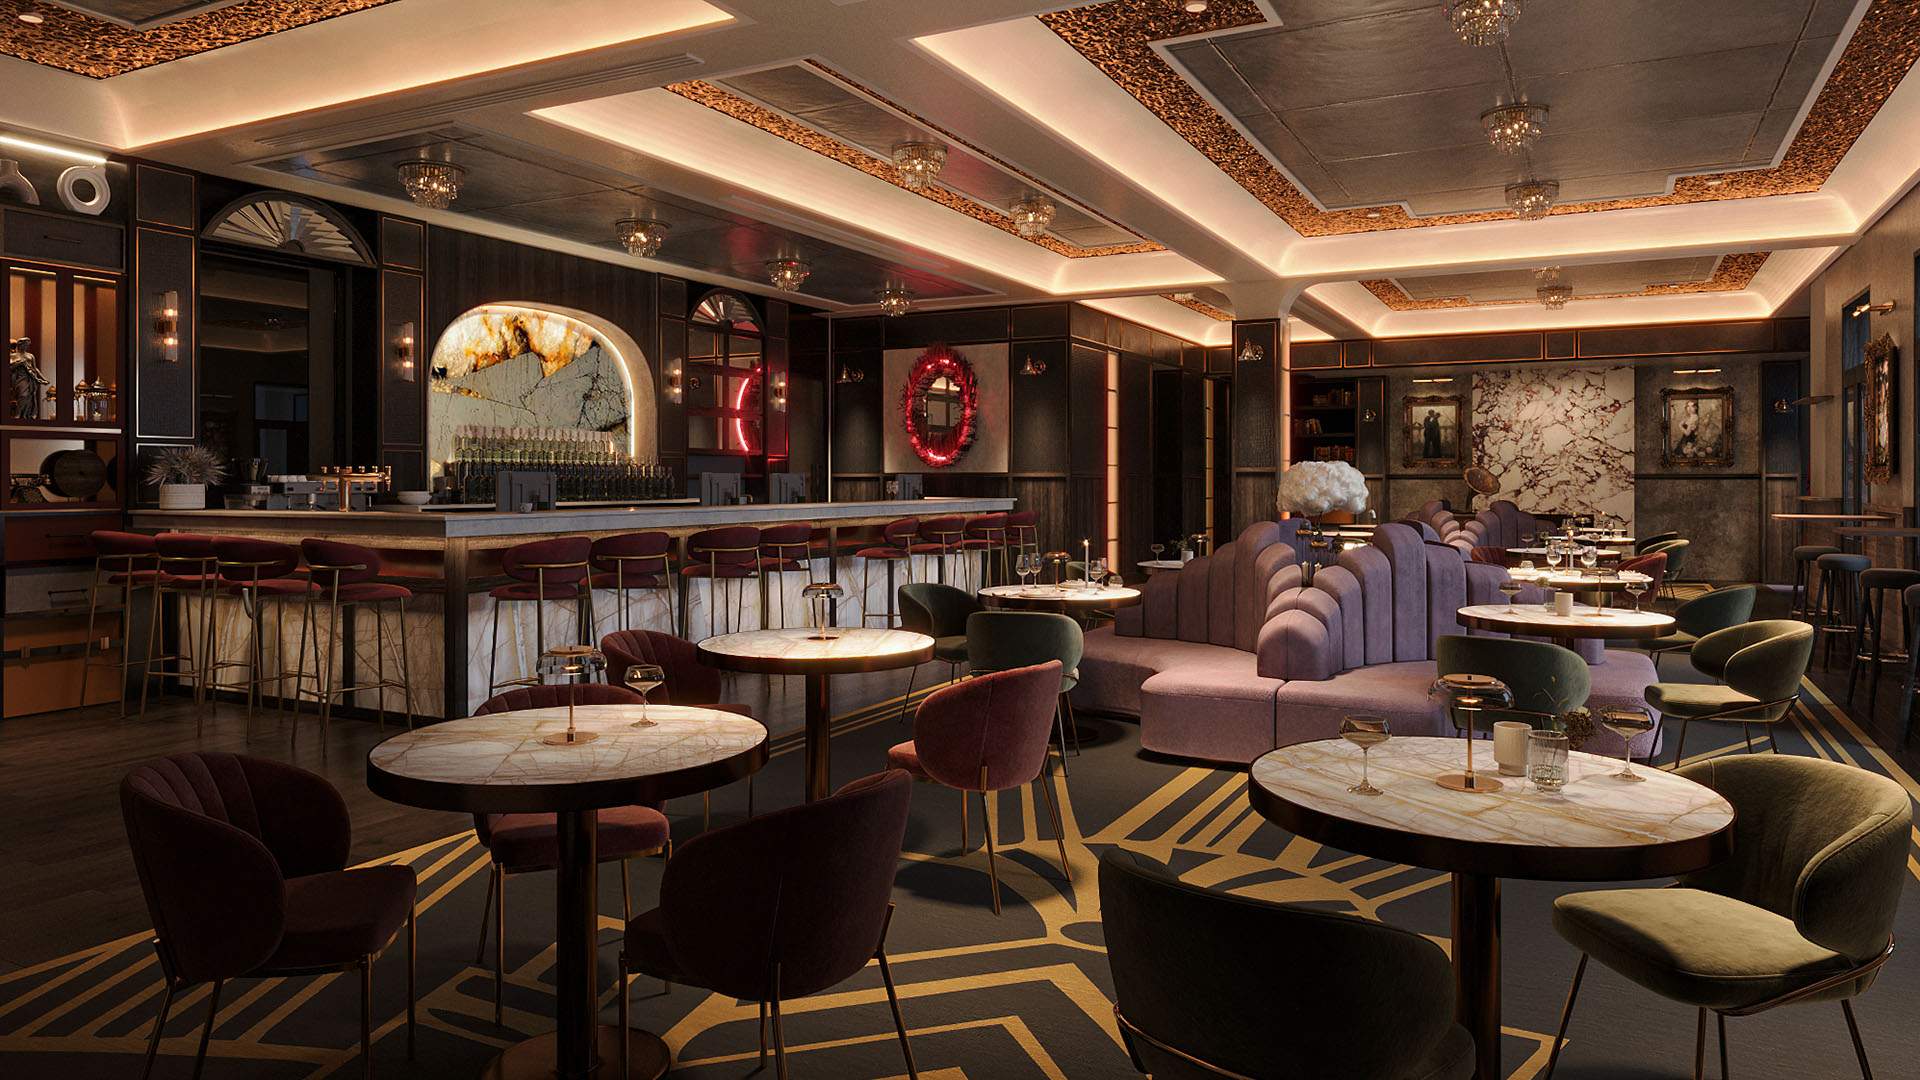 GPO Hotel Is Reopening This Winter with a 'Gatsby'-Themed Cocktail Bar After a $9-Million Revamp